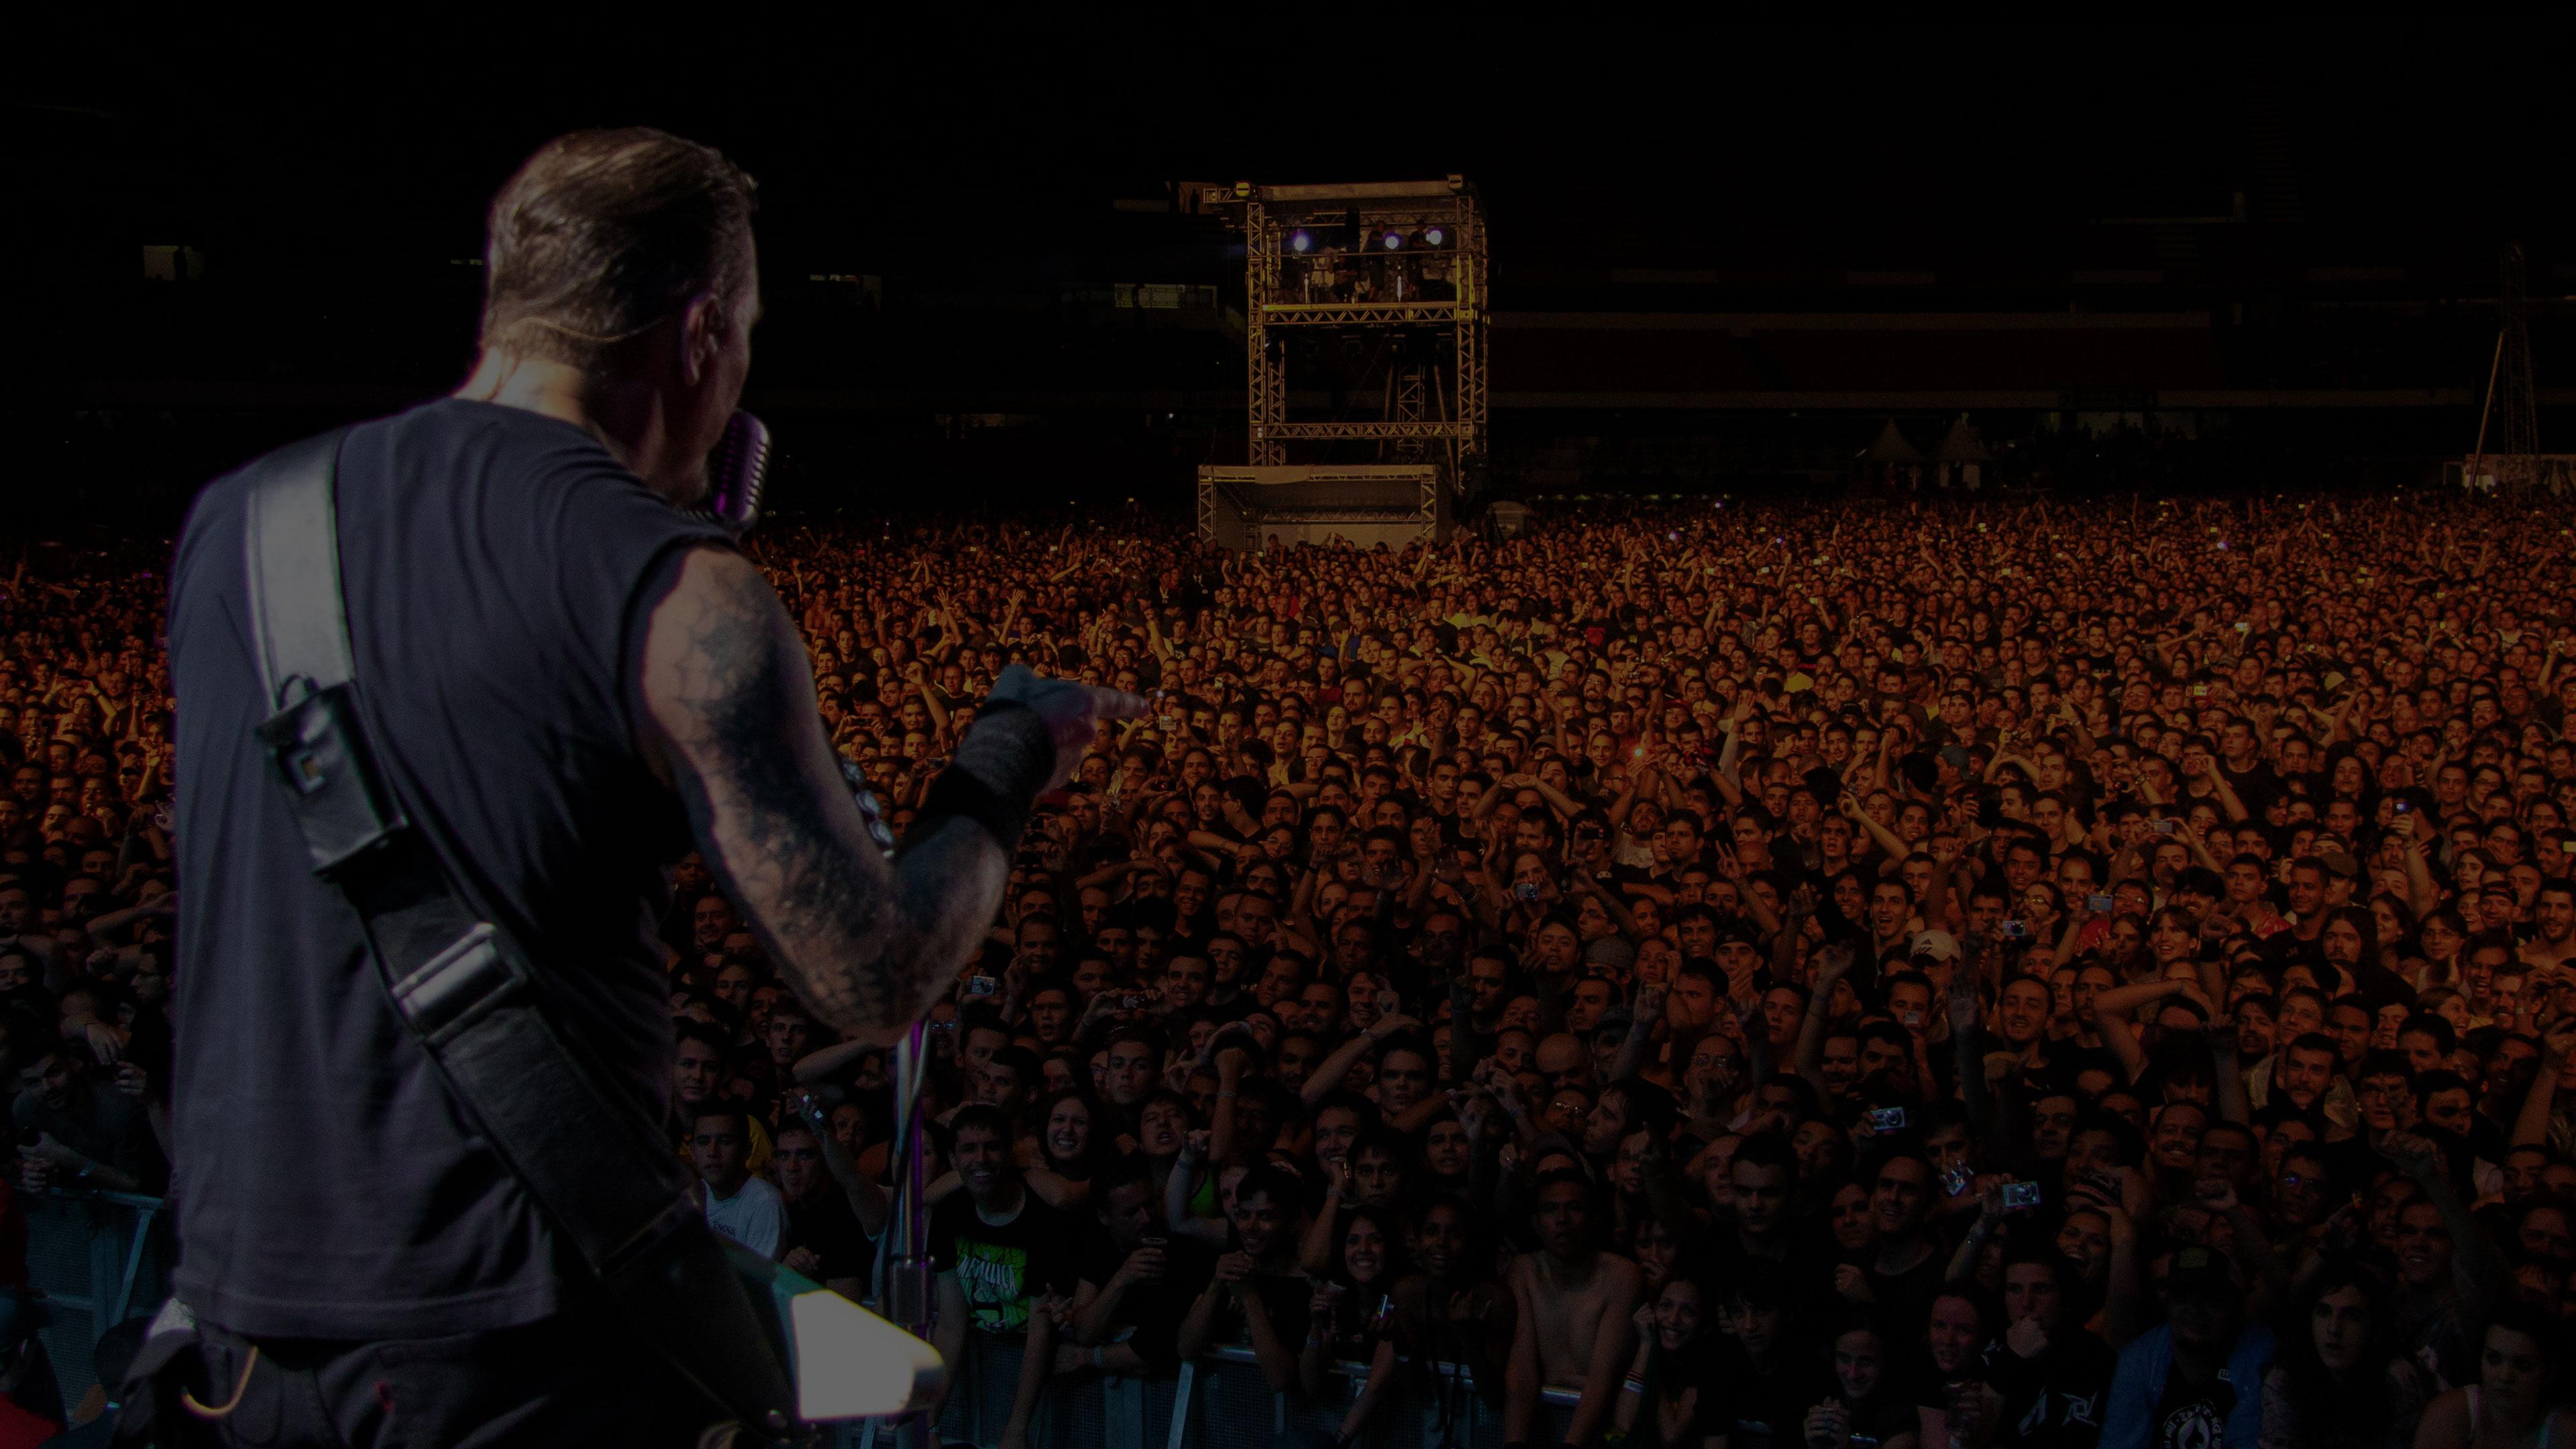 Banner Image for the photo gallery from the gig in São Paulo, Brazil shot on January 31, 2010